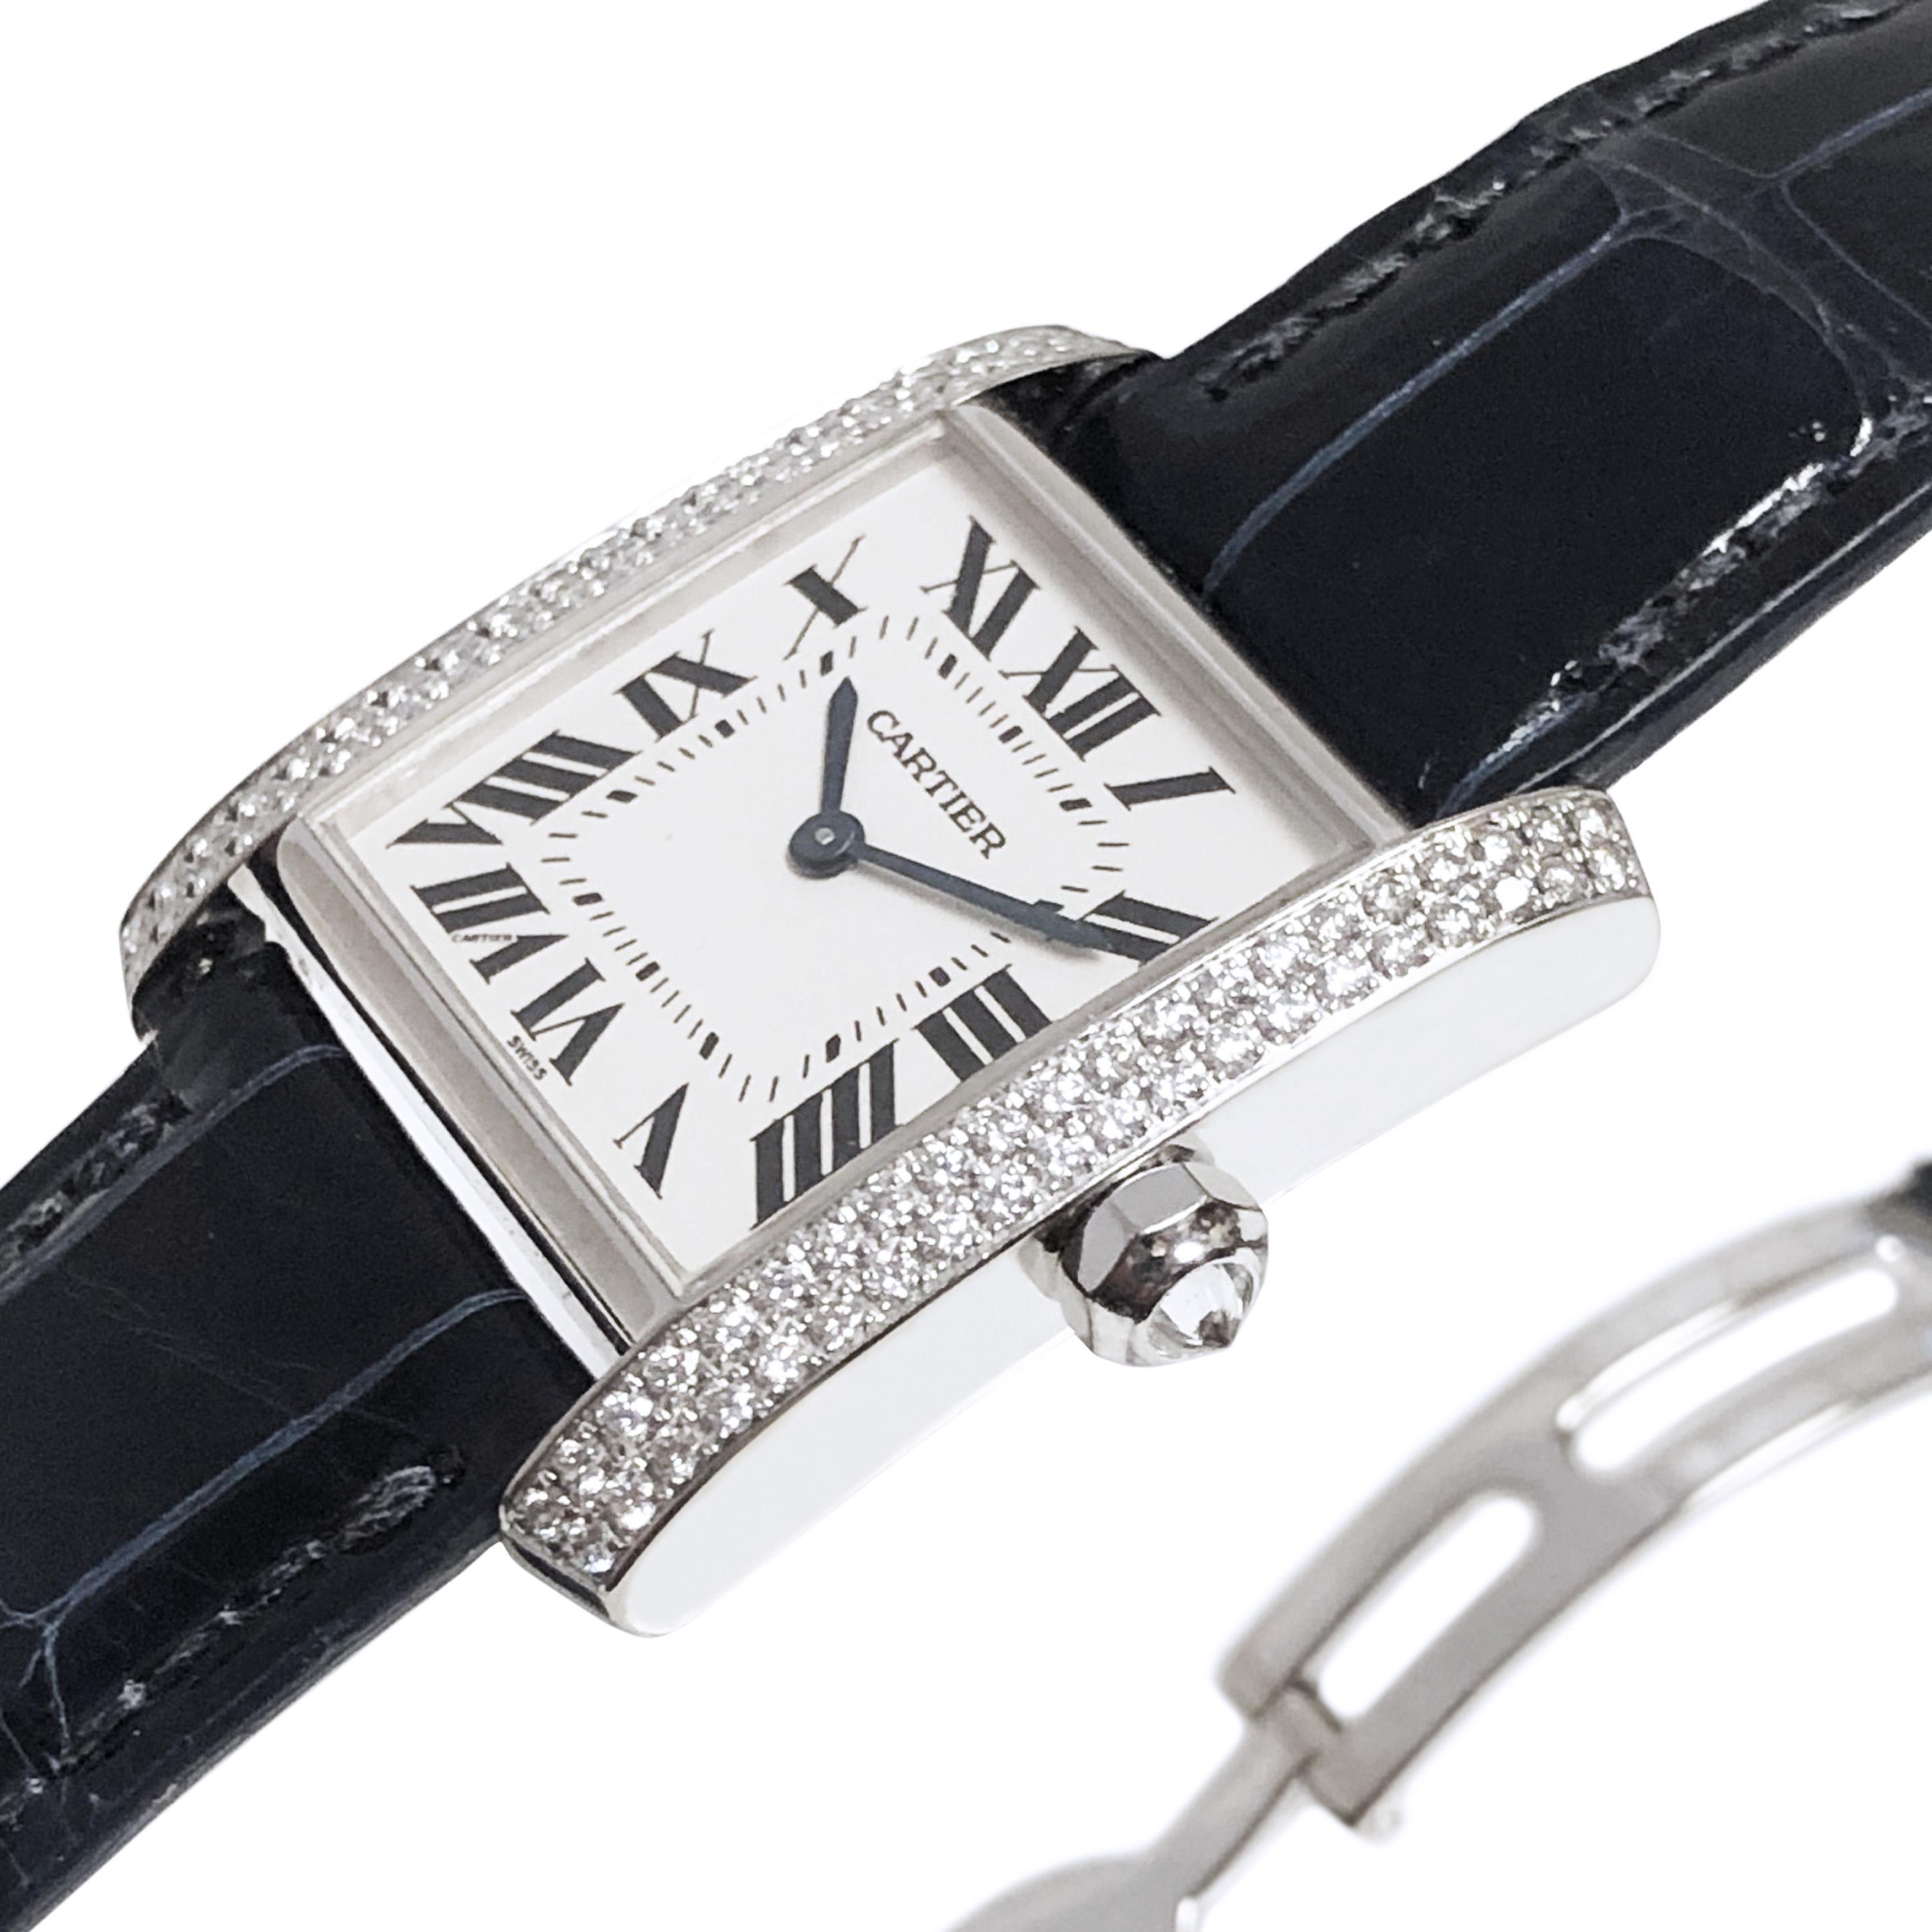 Circa 2017 Cartier Tank Francaise Wrist watch, 30 X 25 M.M. 18K White Gold 2 piece case set with 2 rows of Diamonds and a Diamond set Crown. Quartz Movement, White dial with Black Roman numerals. New Dark Blue Croco Strap with Gold Deployment